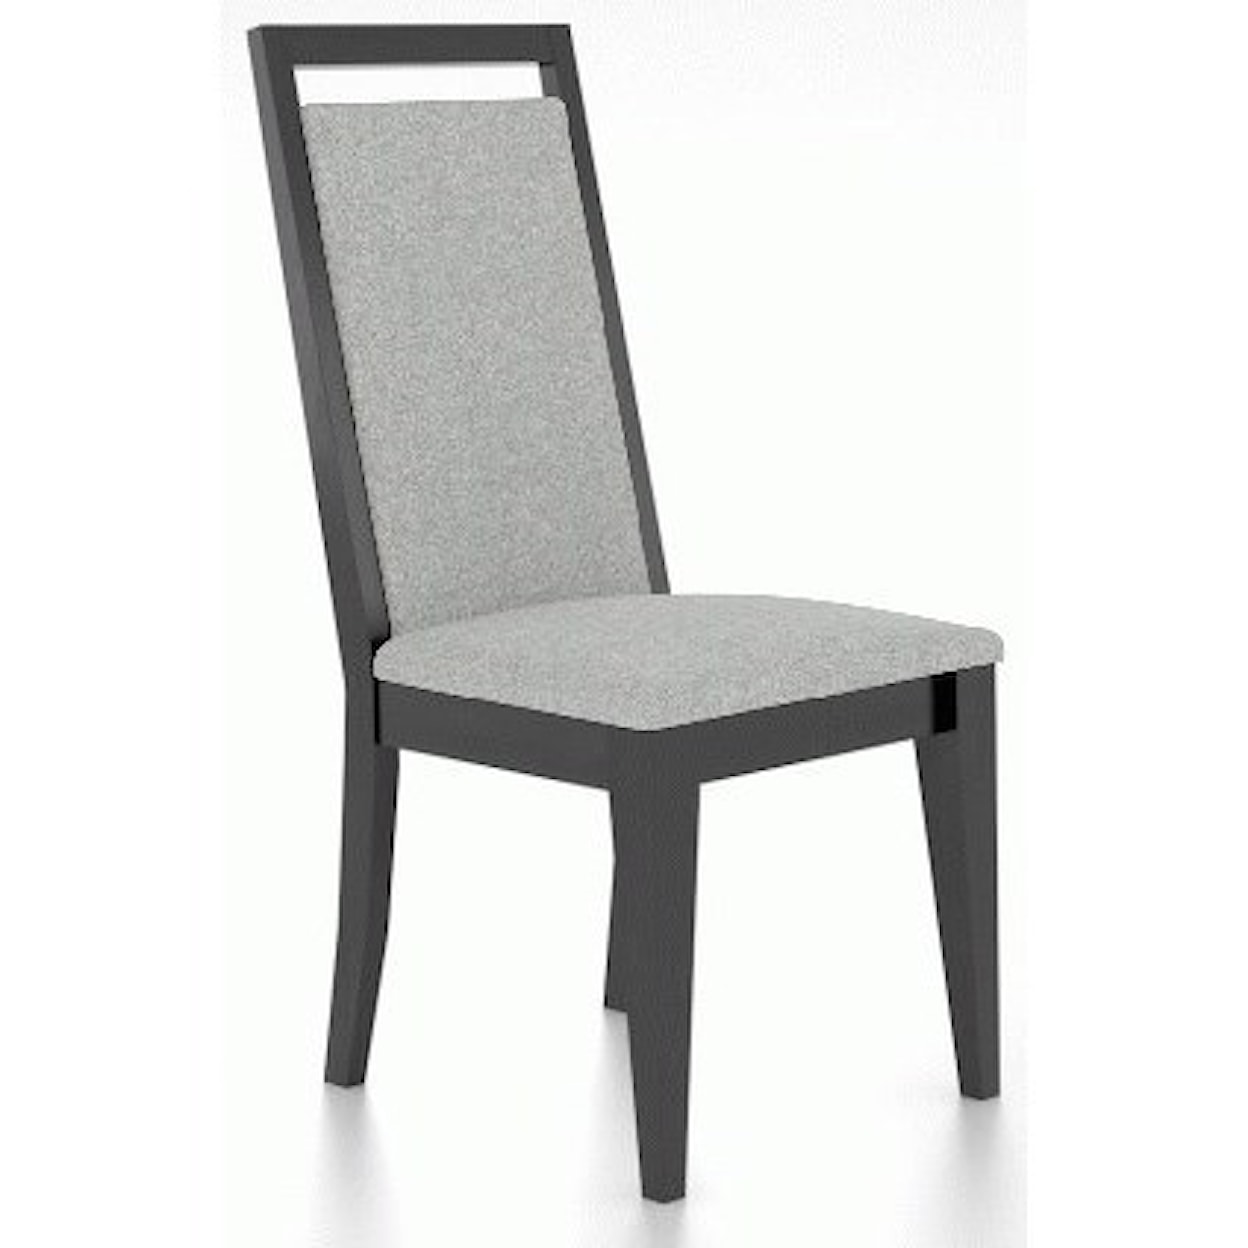 Canadel Gourmet Customizable Upholstered Side Chair